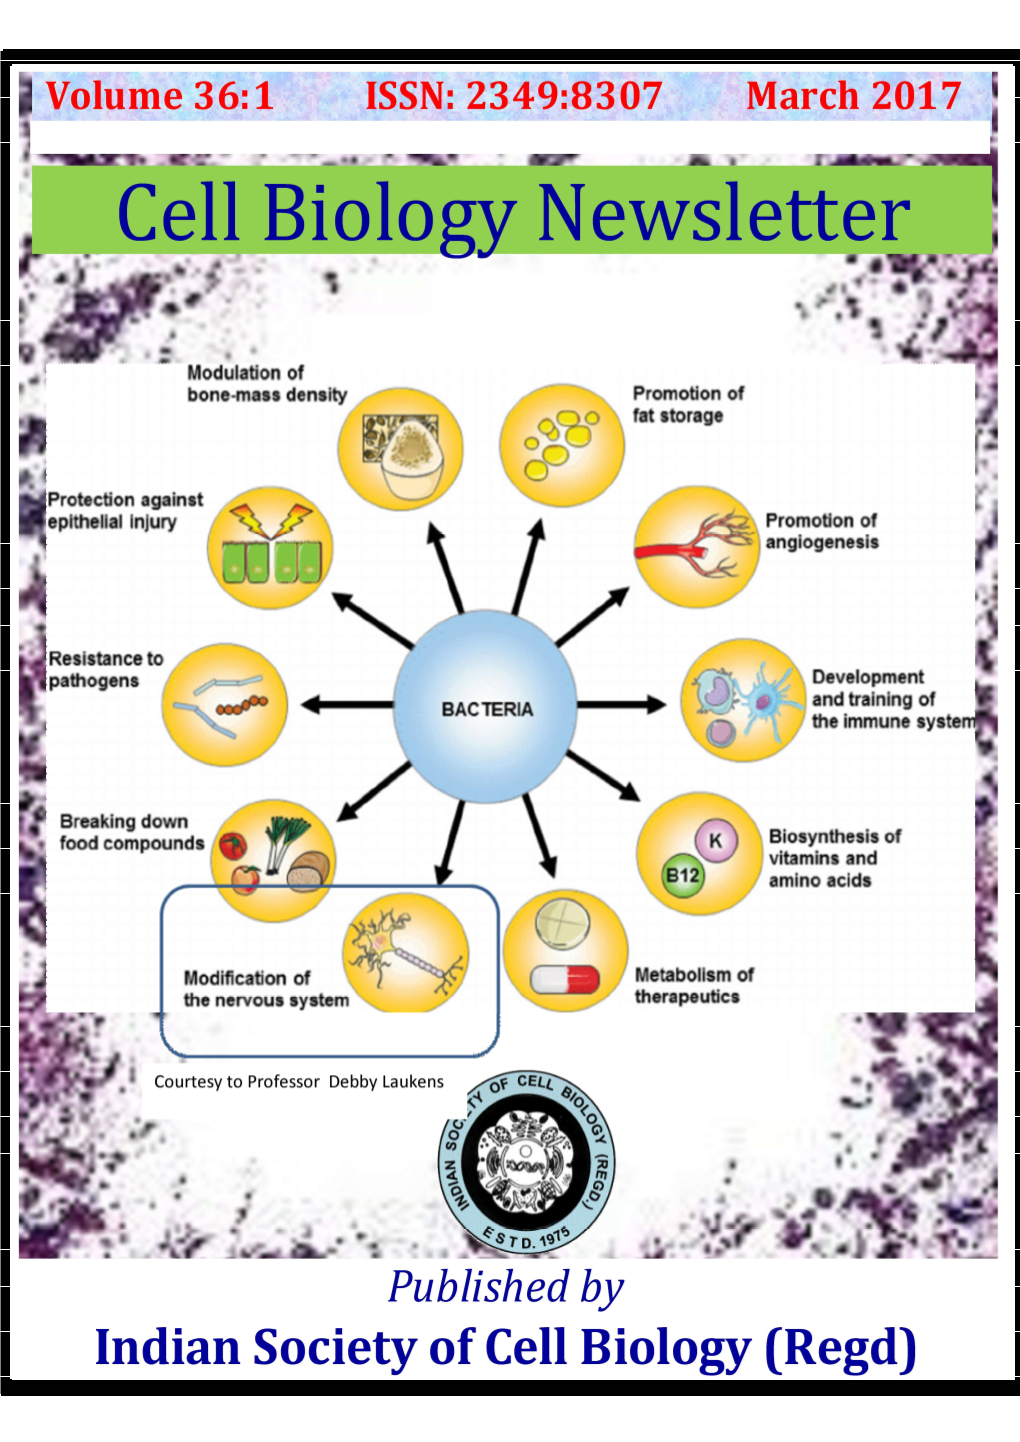 (Regd) Indian Society of Cell Biology